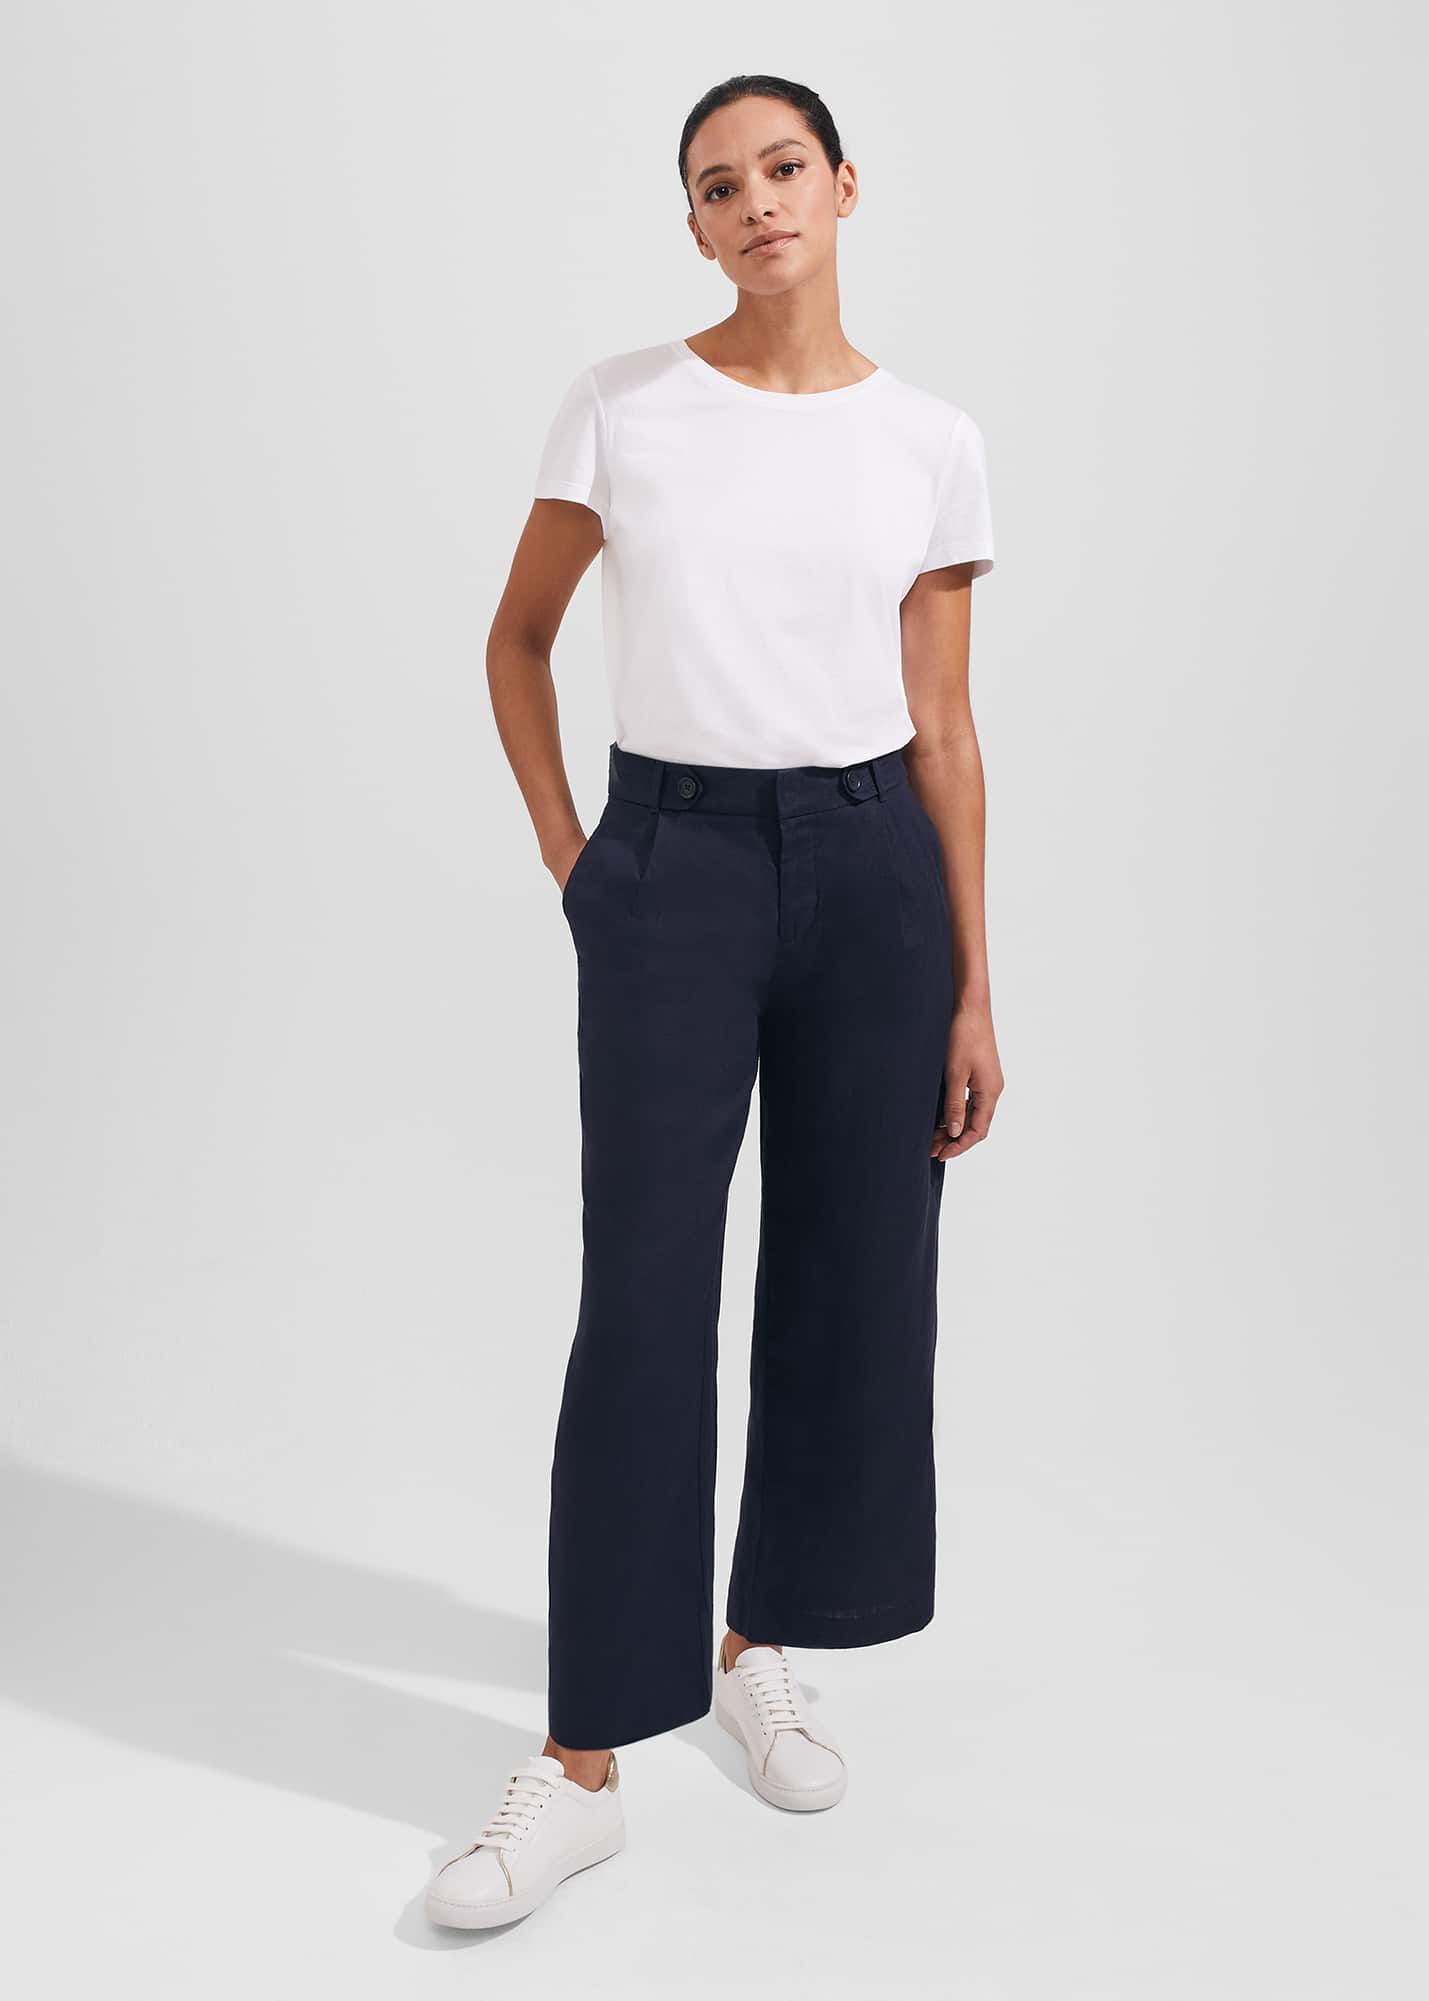 Fashion for Older Women Capri Pants for the Summer Months  Sixty and Me